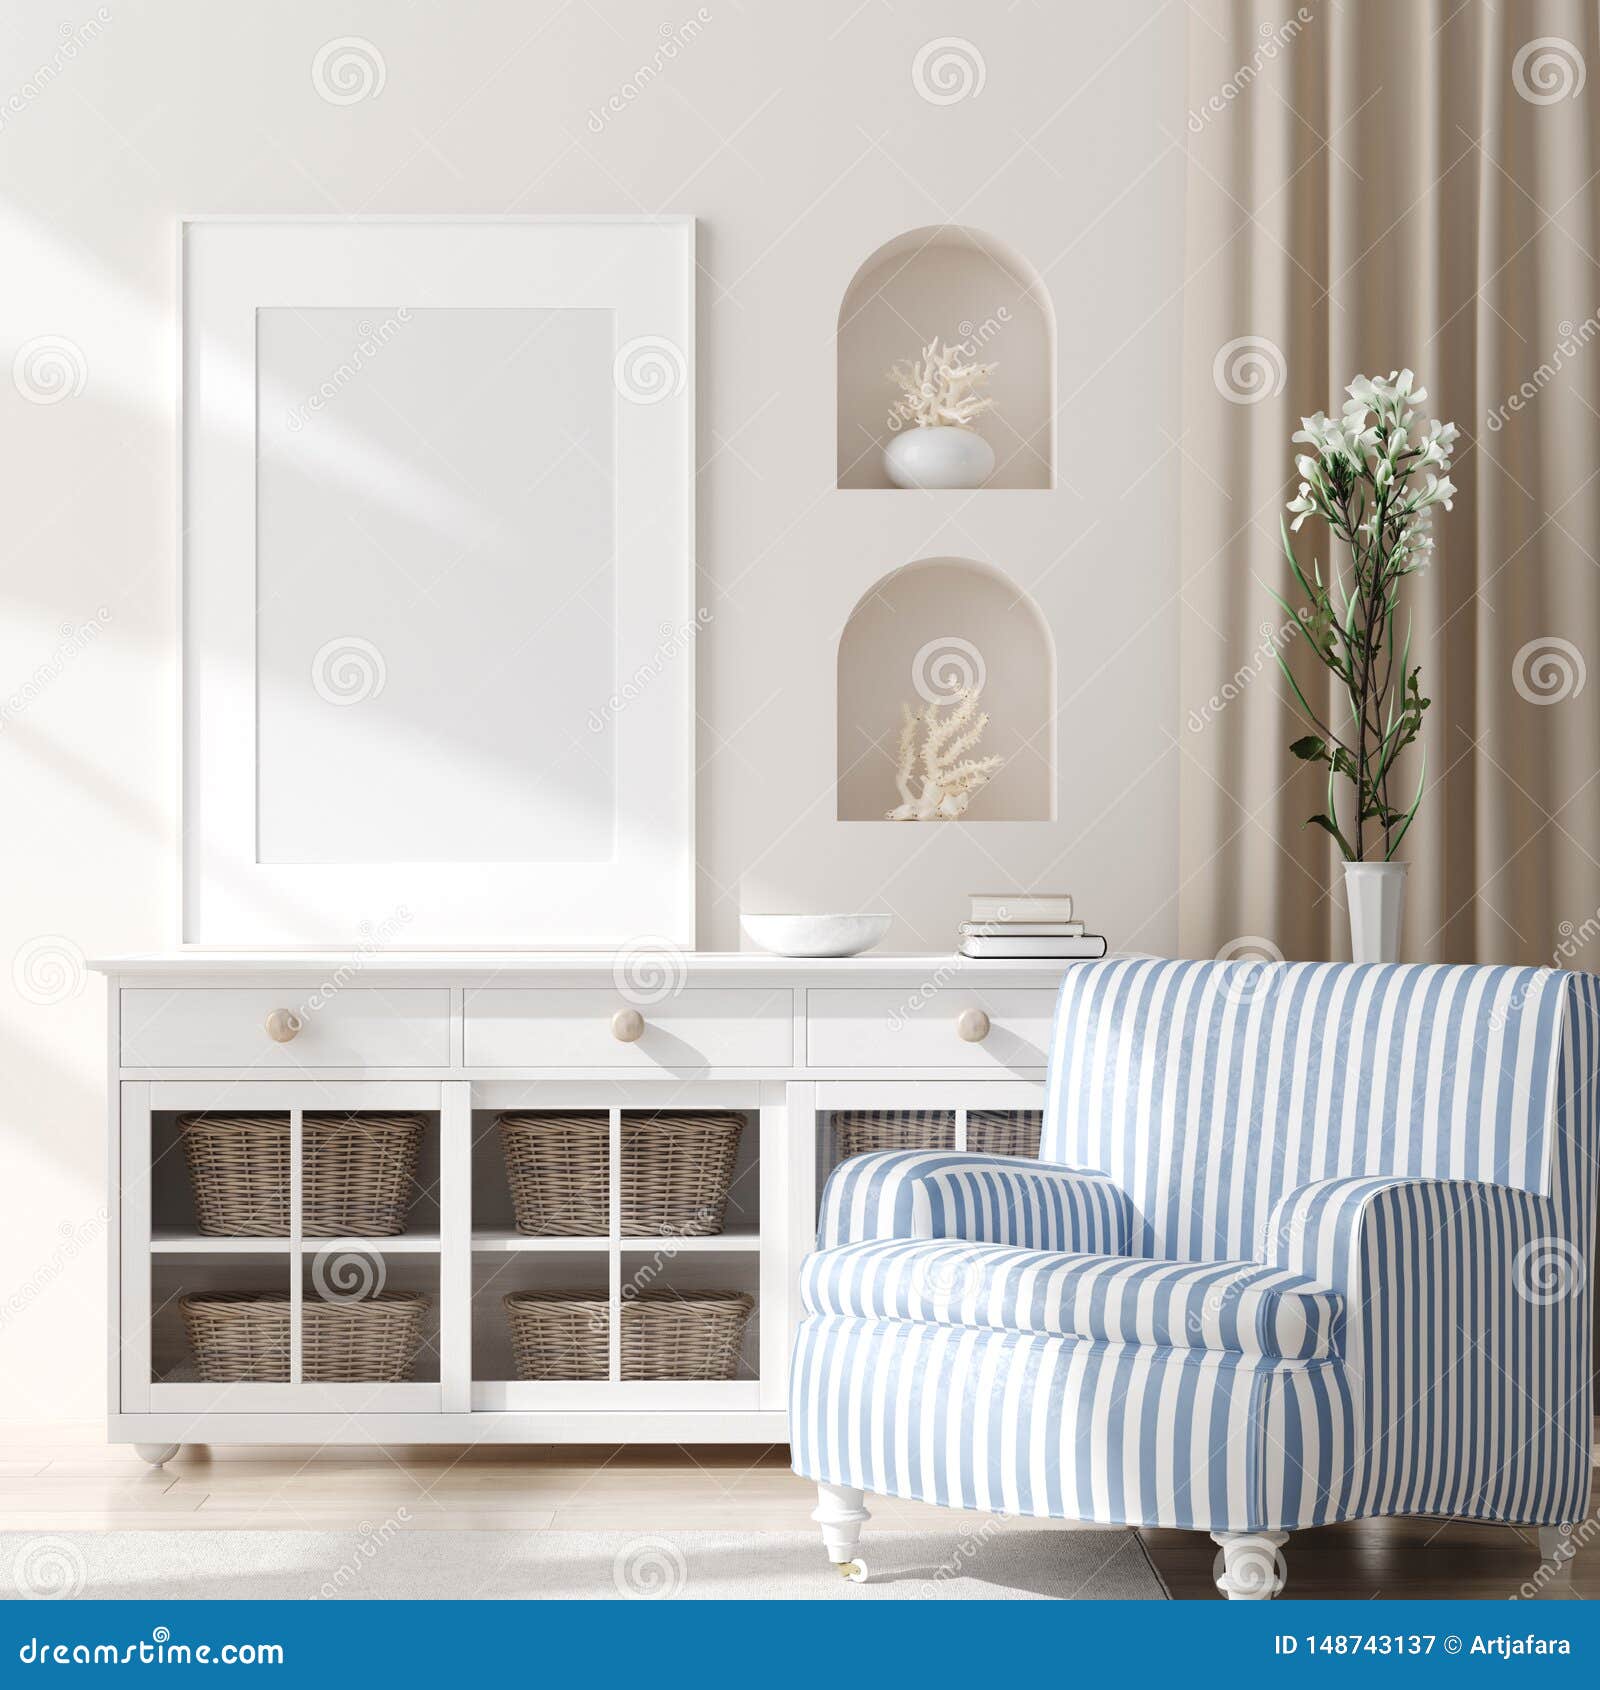 mock up frame in bedroom interior, marine room with sea decor and furniture, coastal style